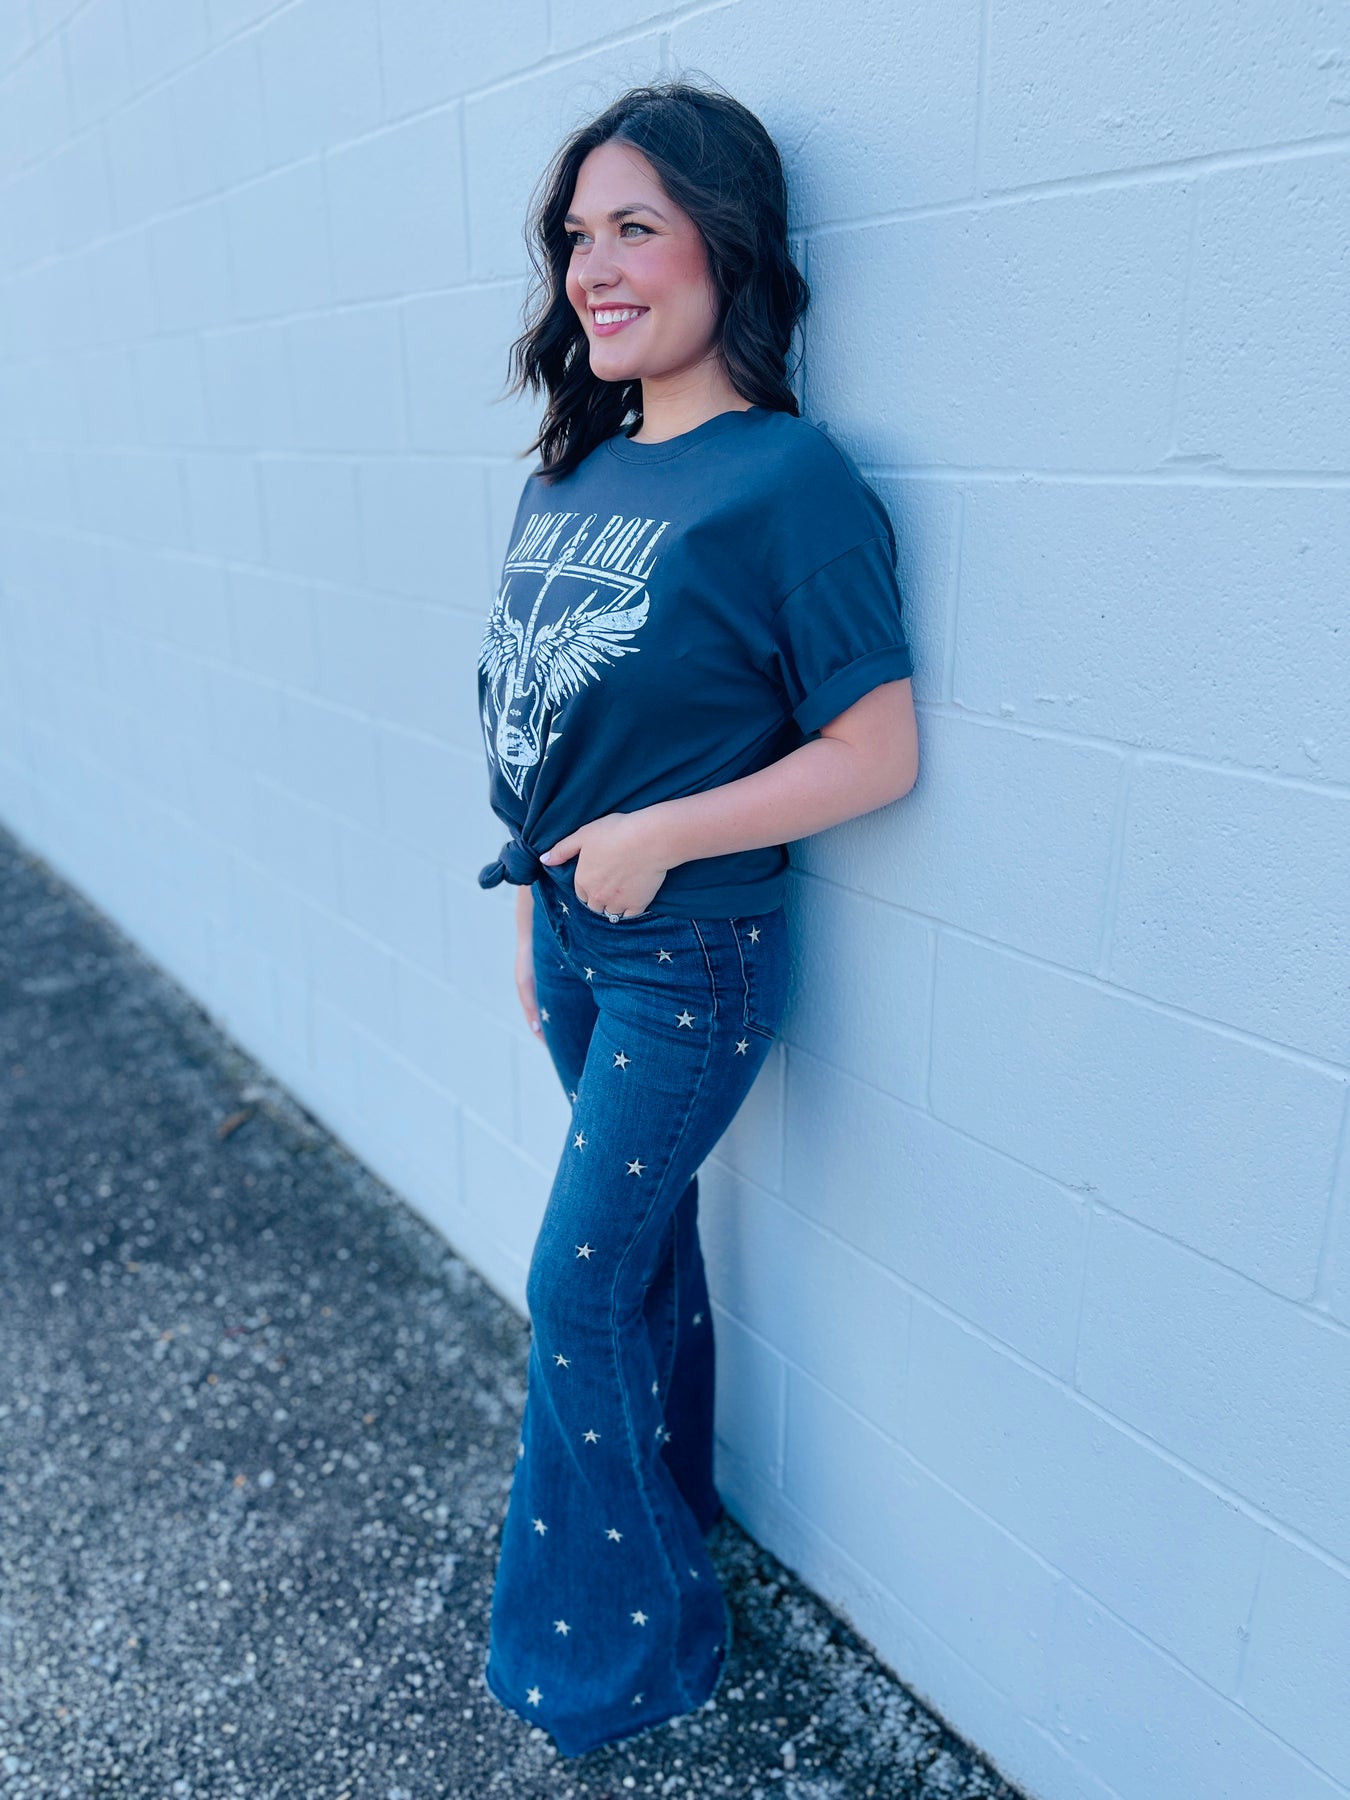 Judy Blue Star Embroidered Tummy Control Jeans · Filly Flair